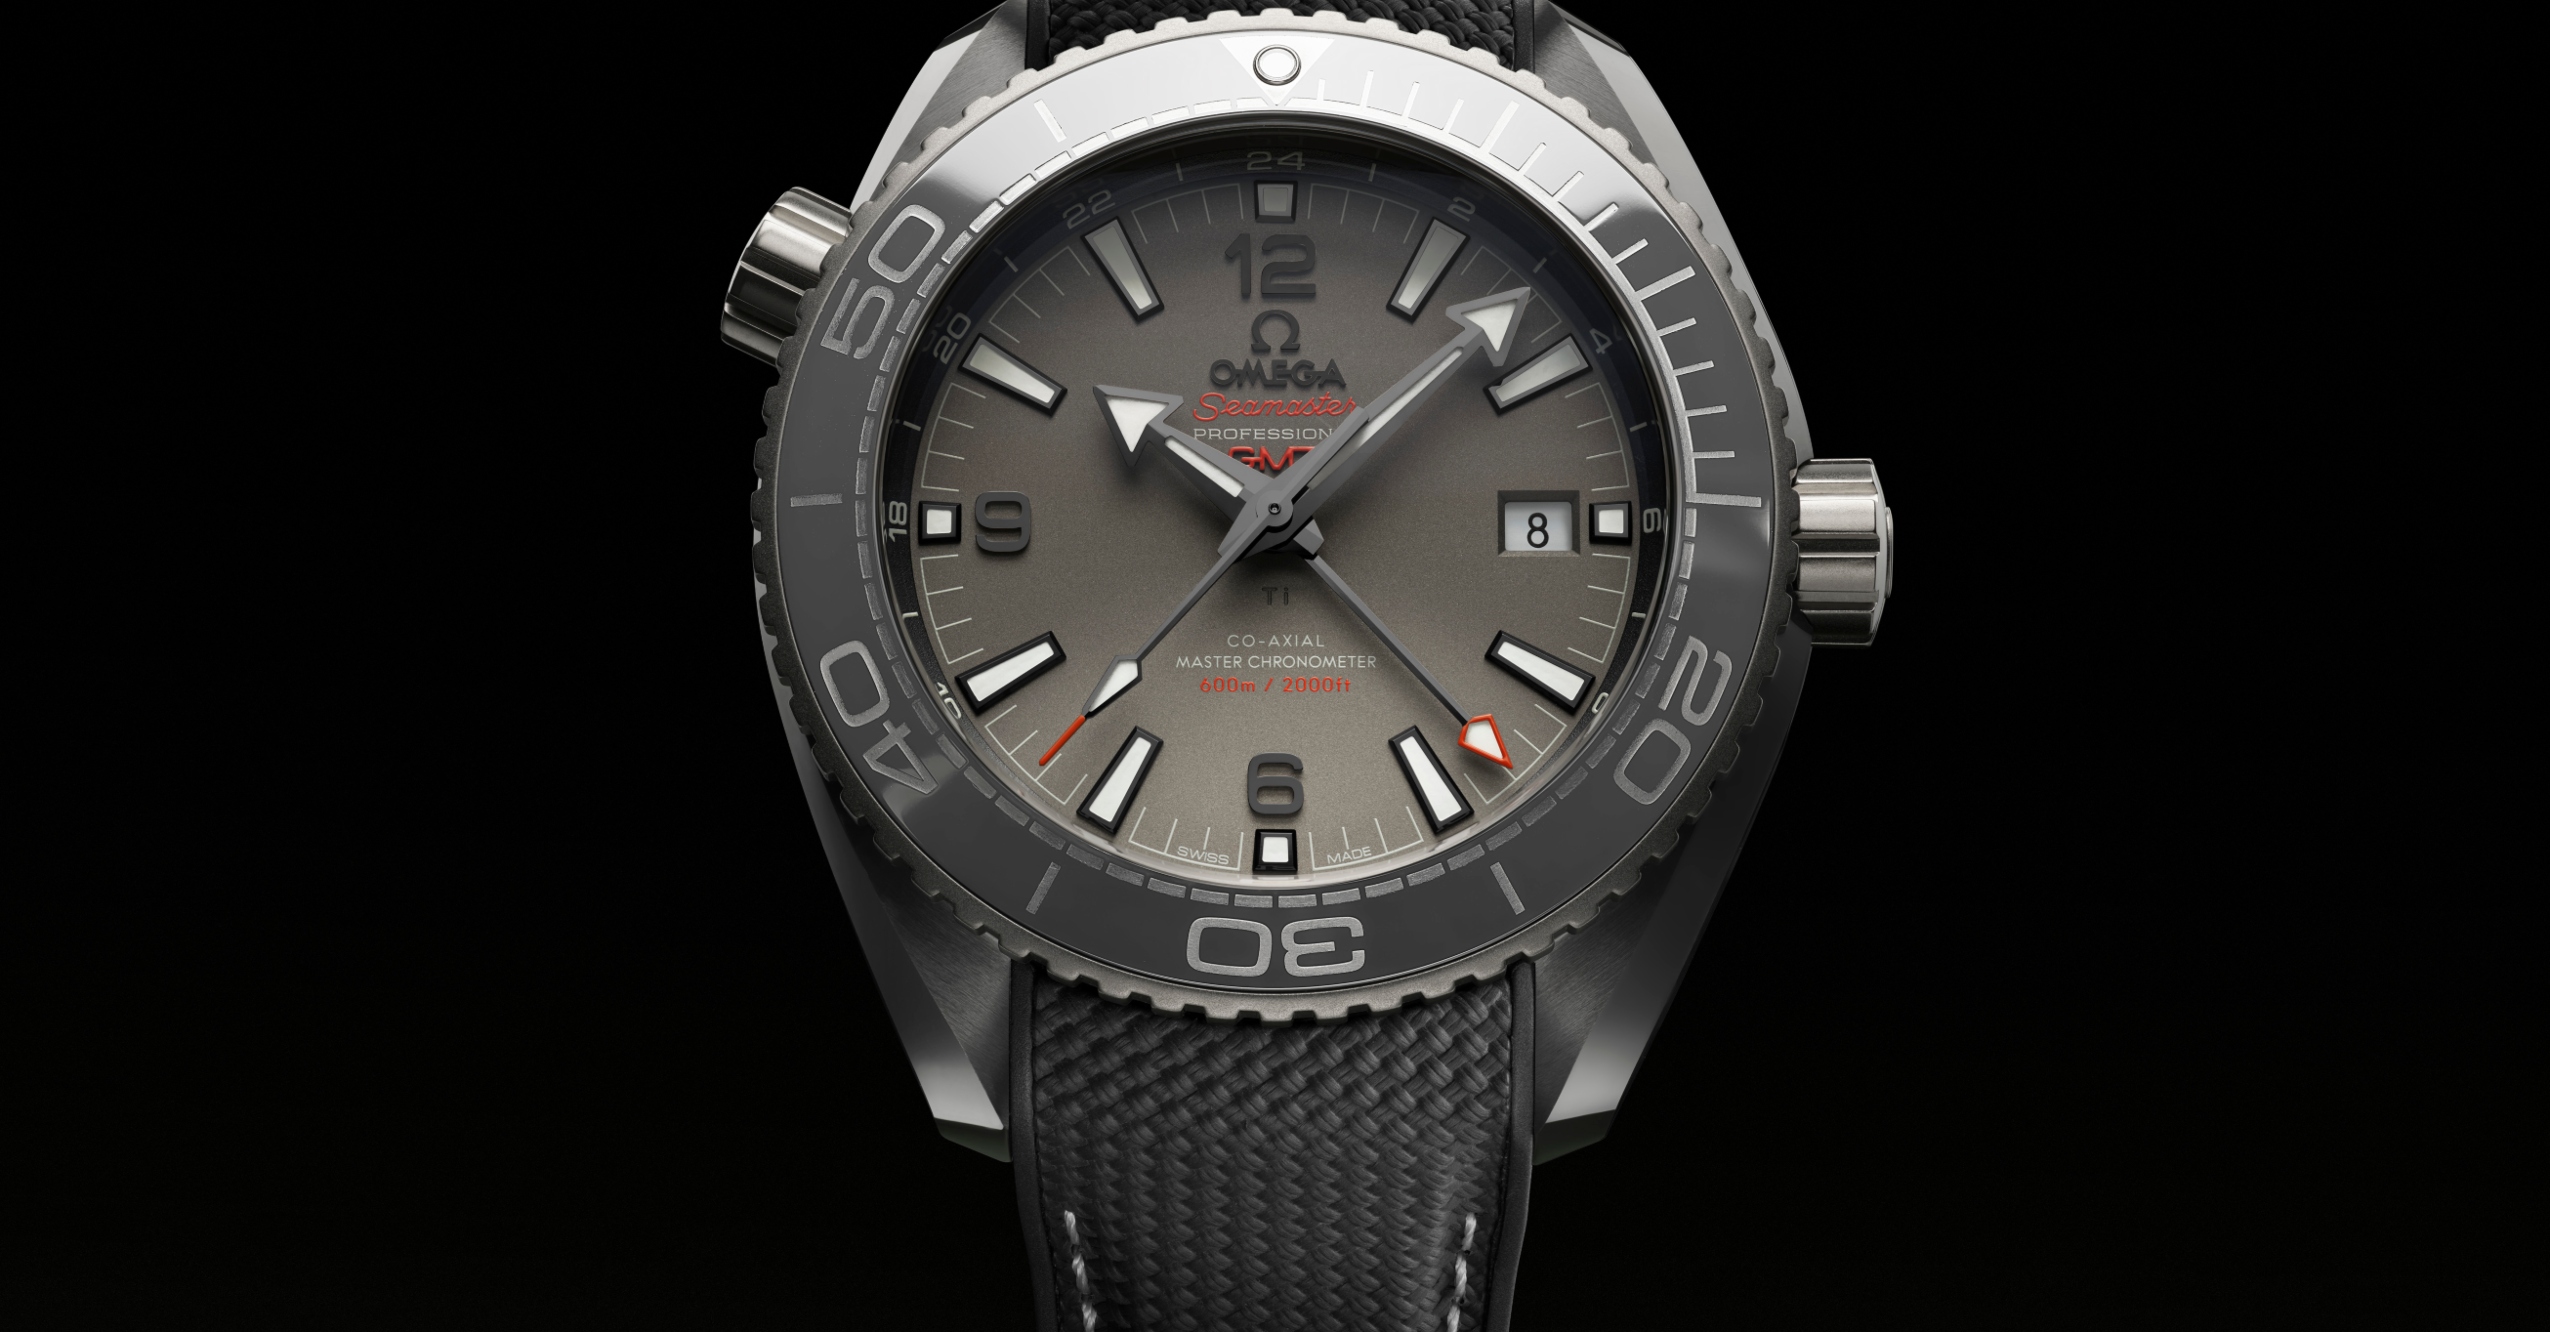 Omega Seamaster Grey Ceramic Feature Omega Updates Seamaster Planet Ocean With Grey Ceramic Edition